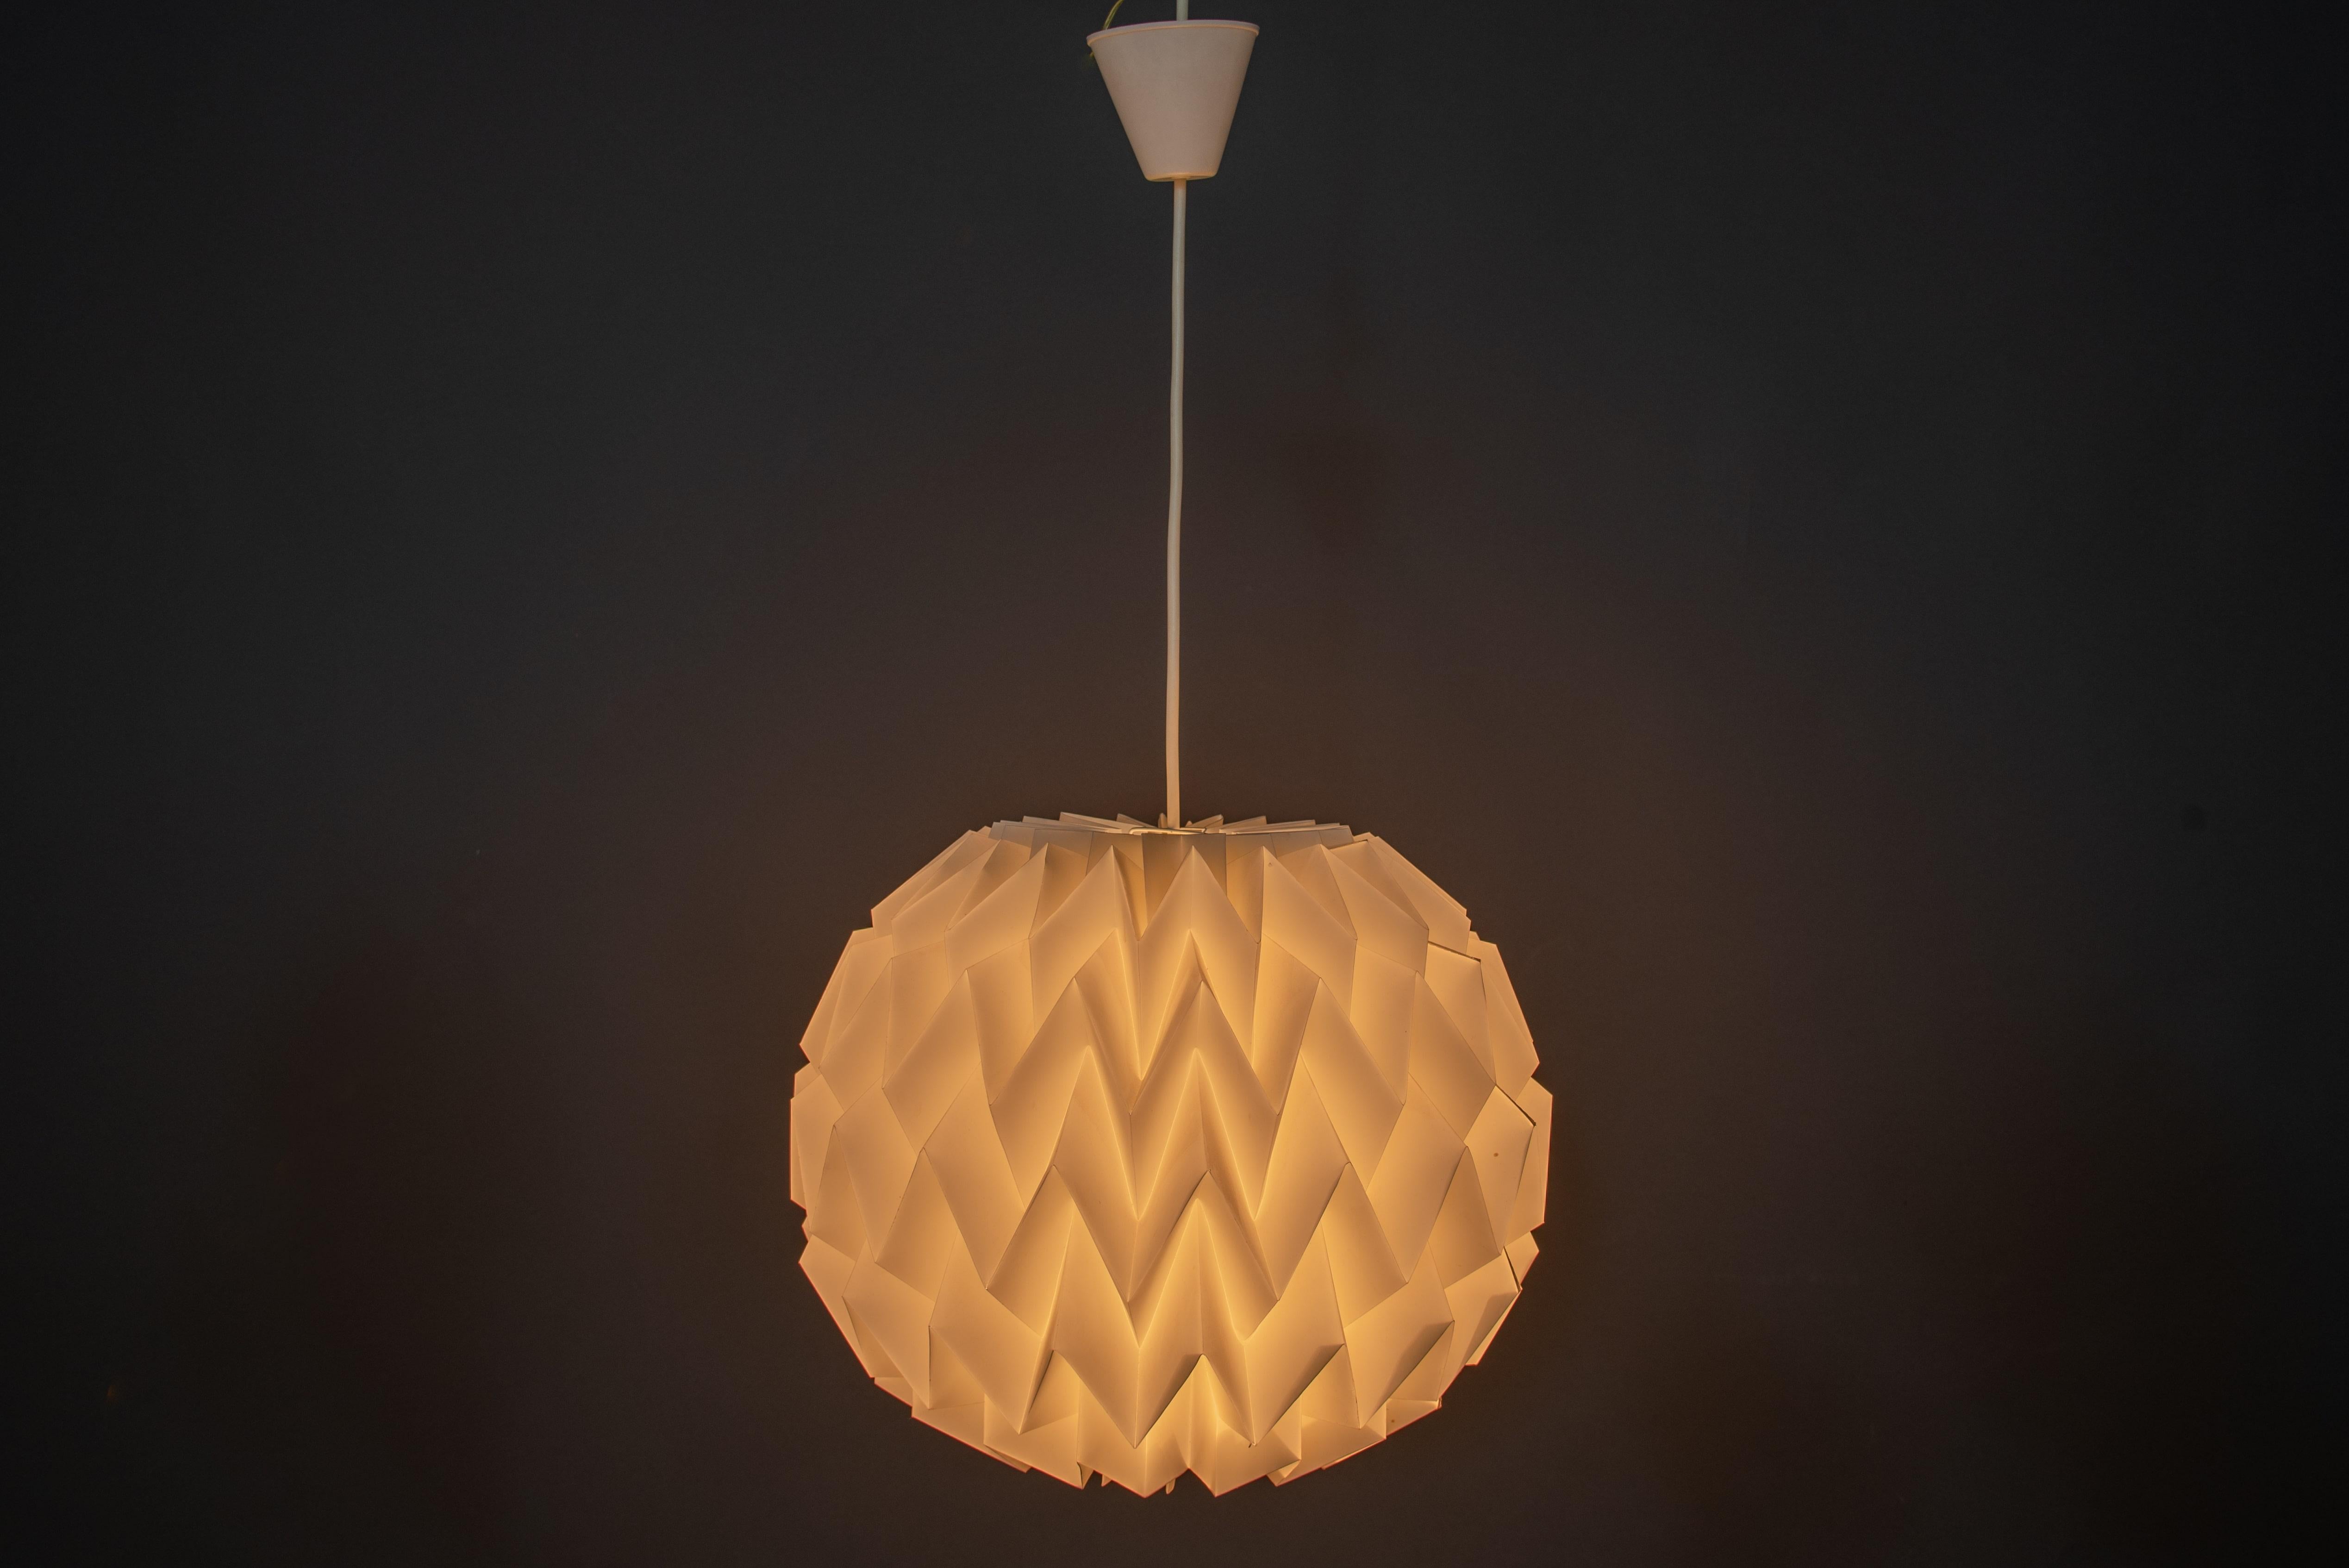 Vintage Scandinavian pendant by architect Kaare Klint (1888-1954) 
Round ’Origami’ shape 
Metal structure illuminated from the inside, allows a play of light and an atmosphere of rare intensity.
Perfectly working.

Every item of our Gallery, upon